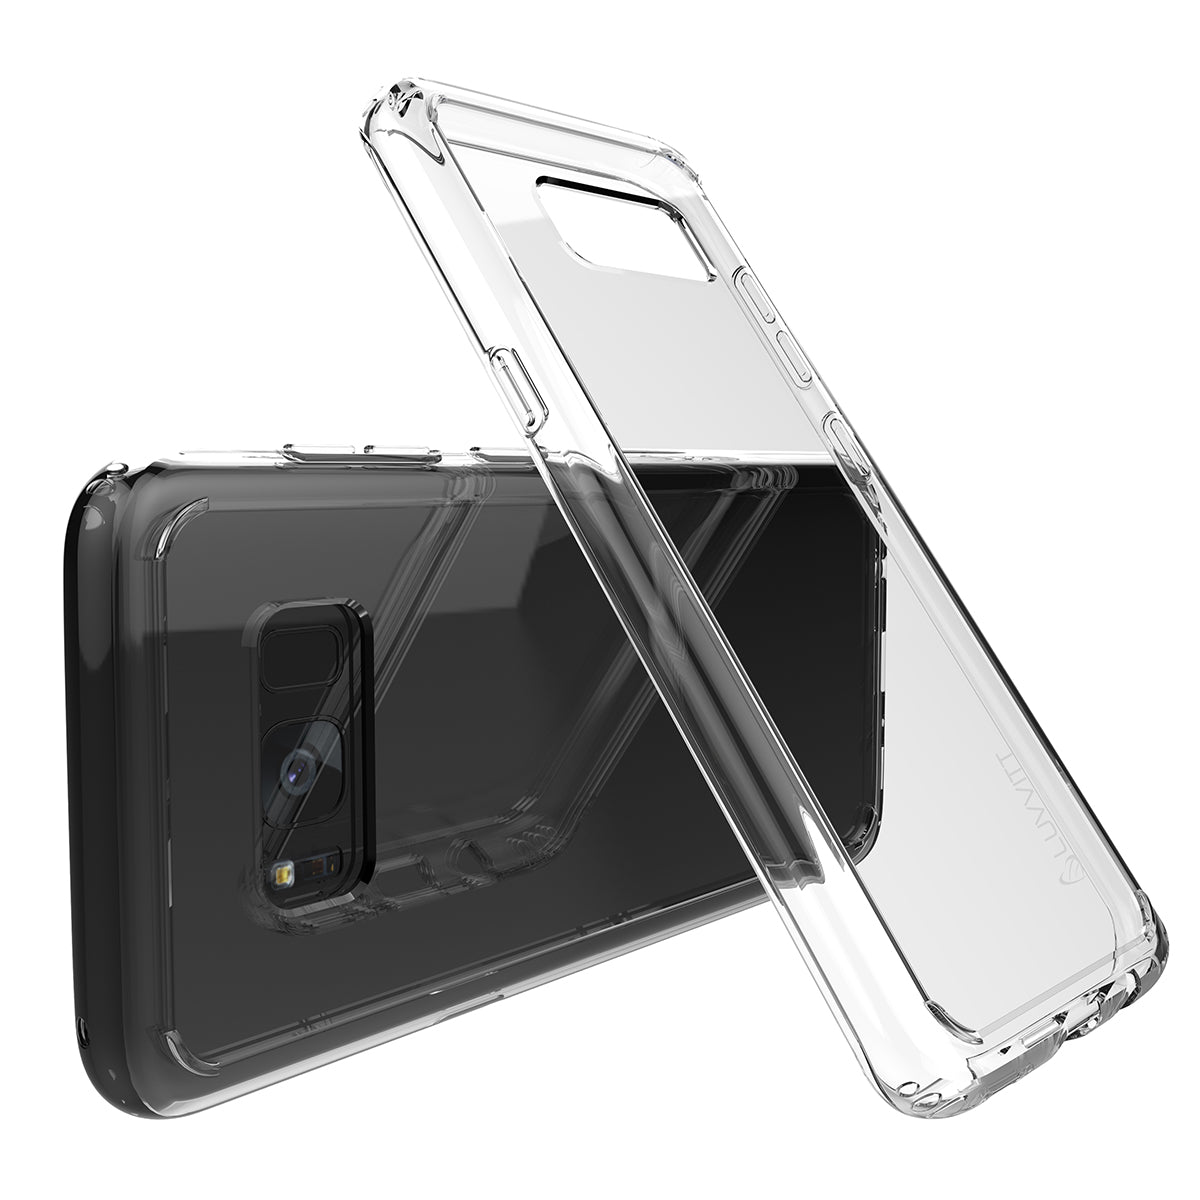 LUVVITT CLEAR VIEW Case for Galaxy S8 Plus - Clear